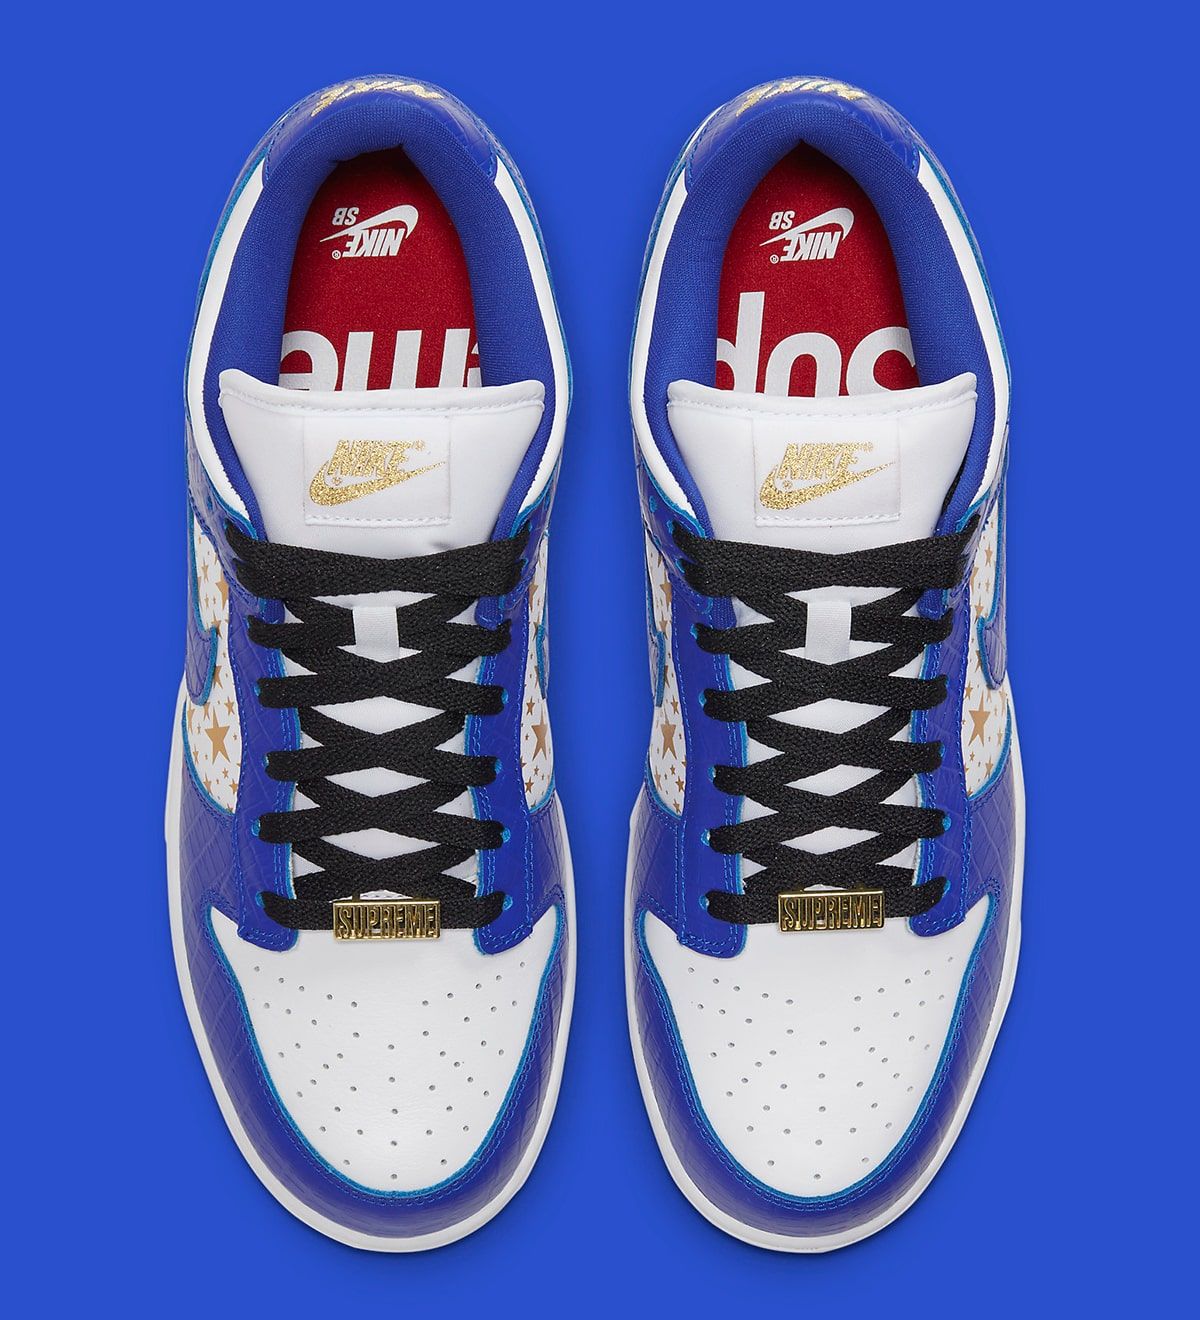 Supreme x Nike SB "Stars" for March 4th Release | HOUSE OF